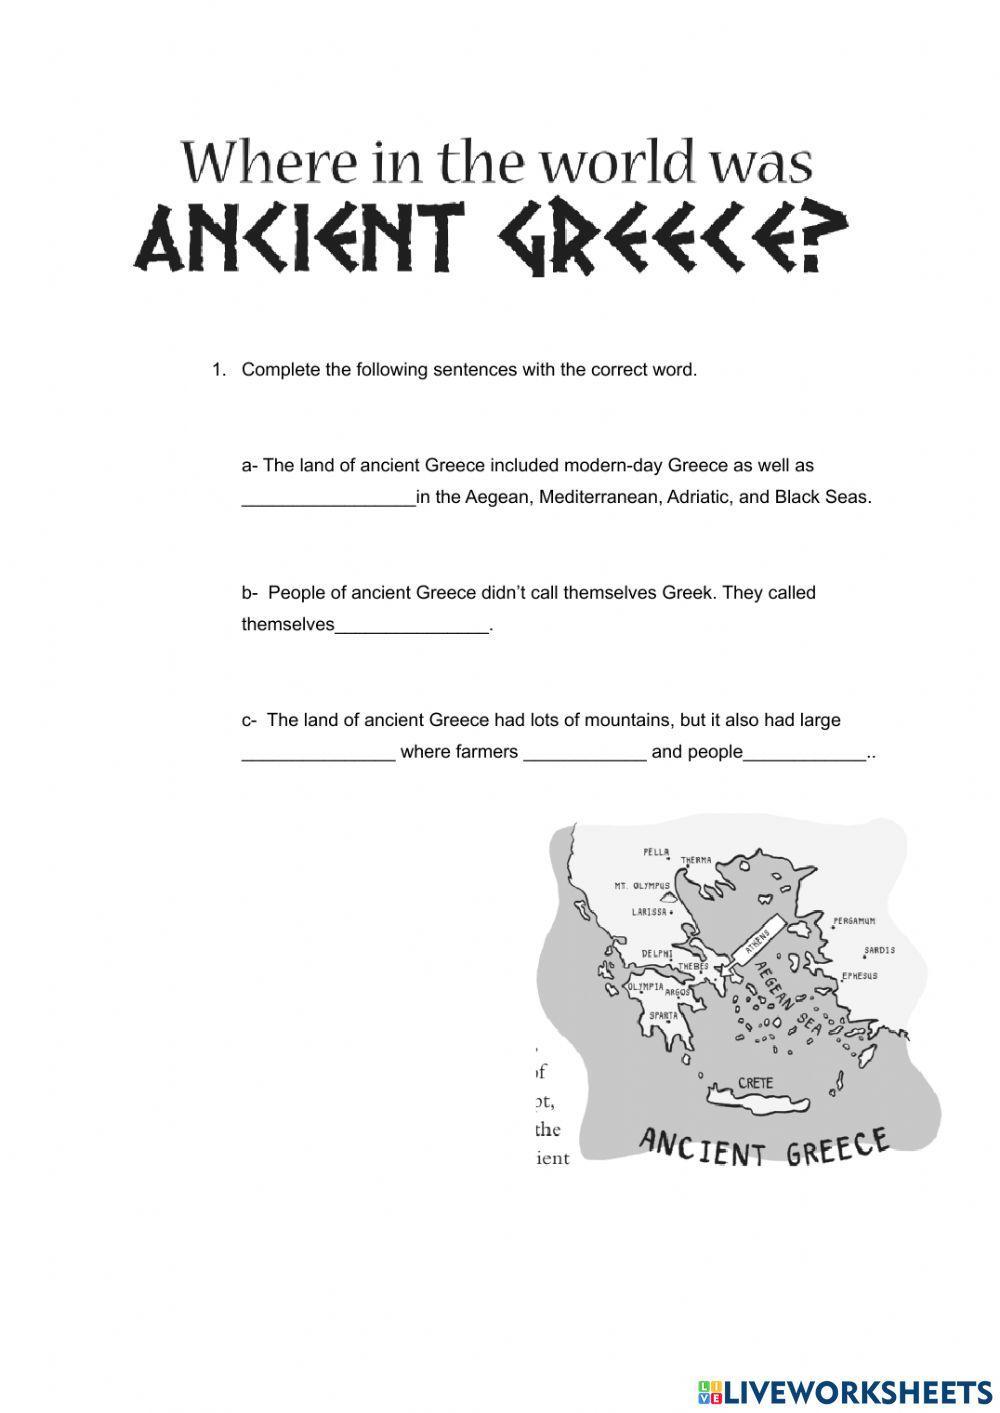 Where in the World was Ancient Greece?